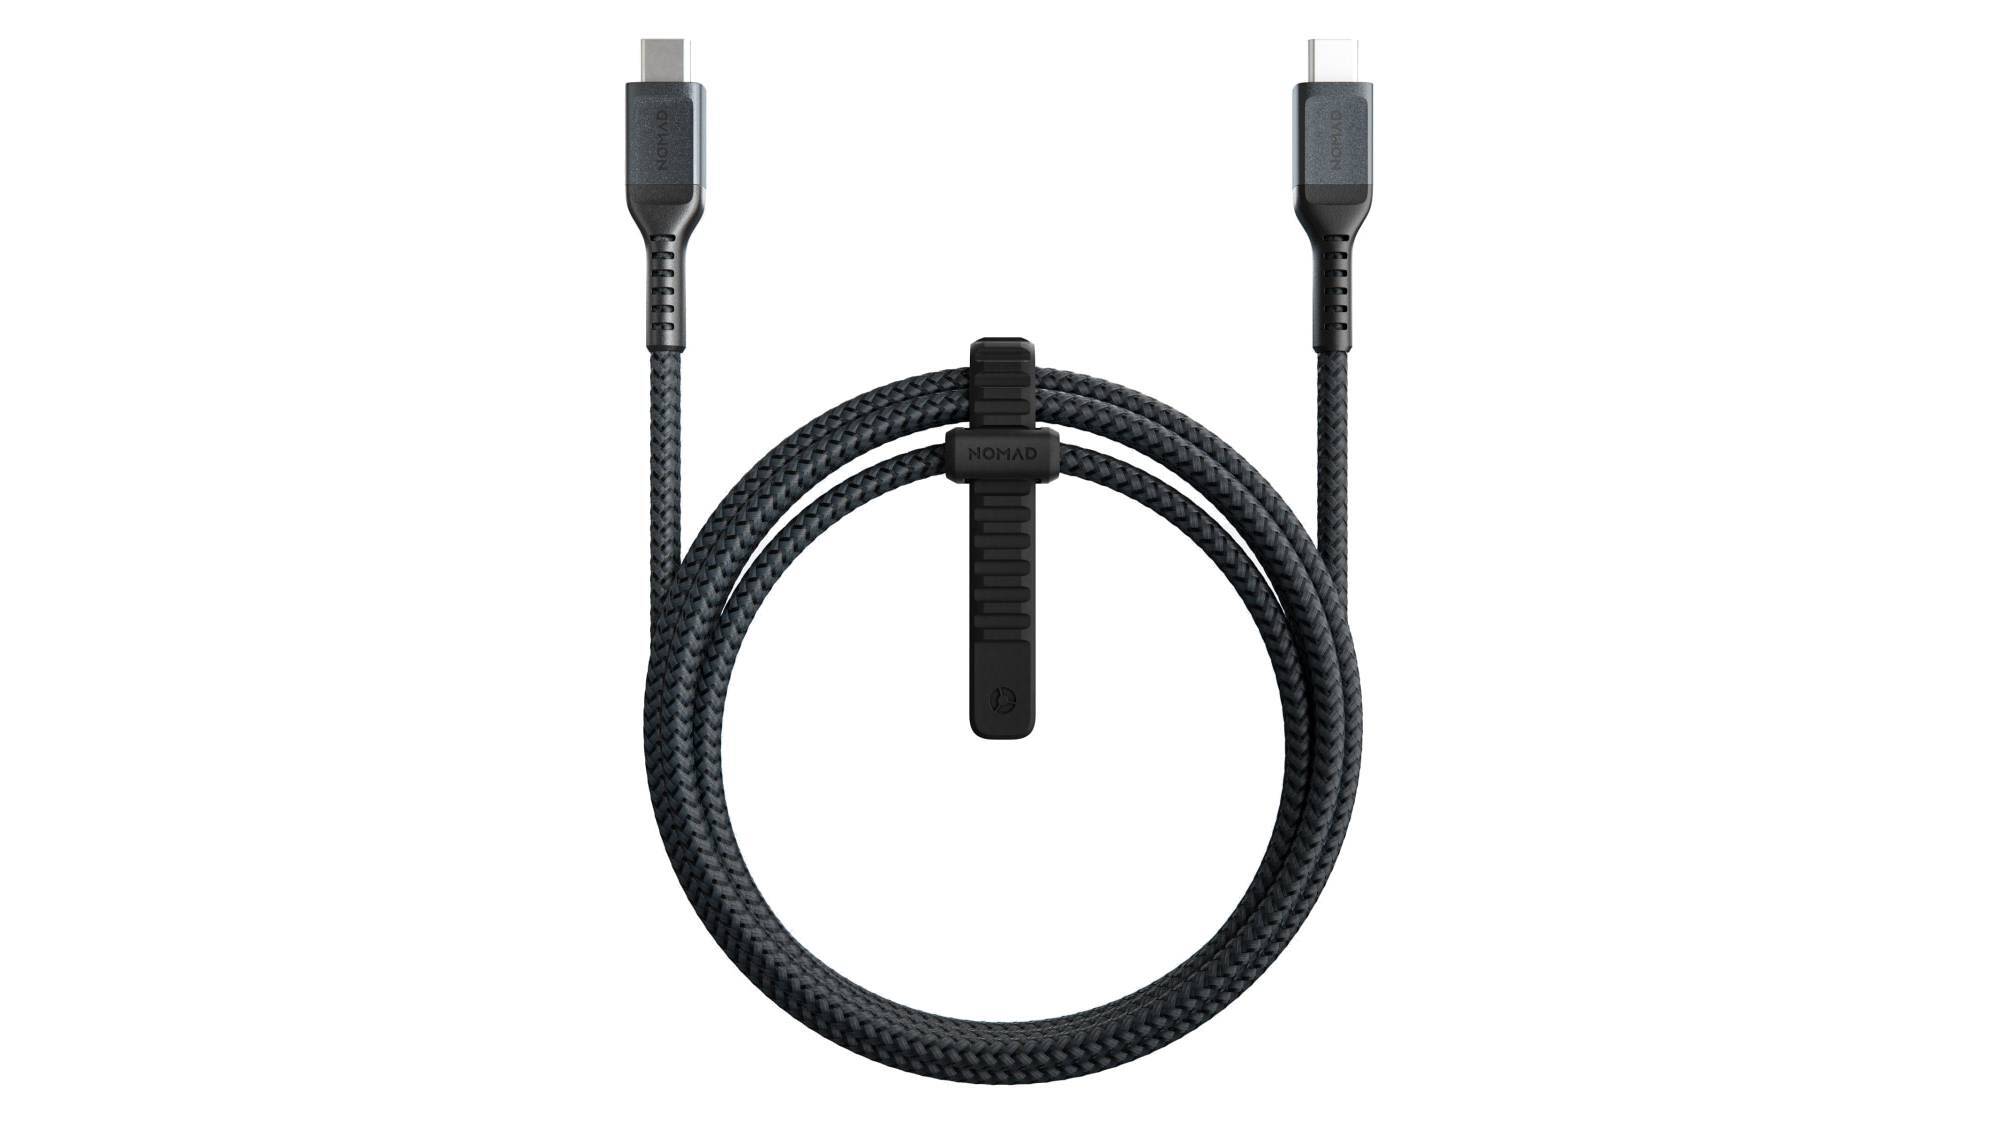 2m USB A to USB C Charging Cable Durable - USB-C Cables